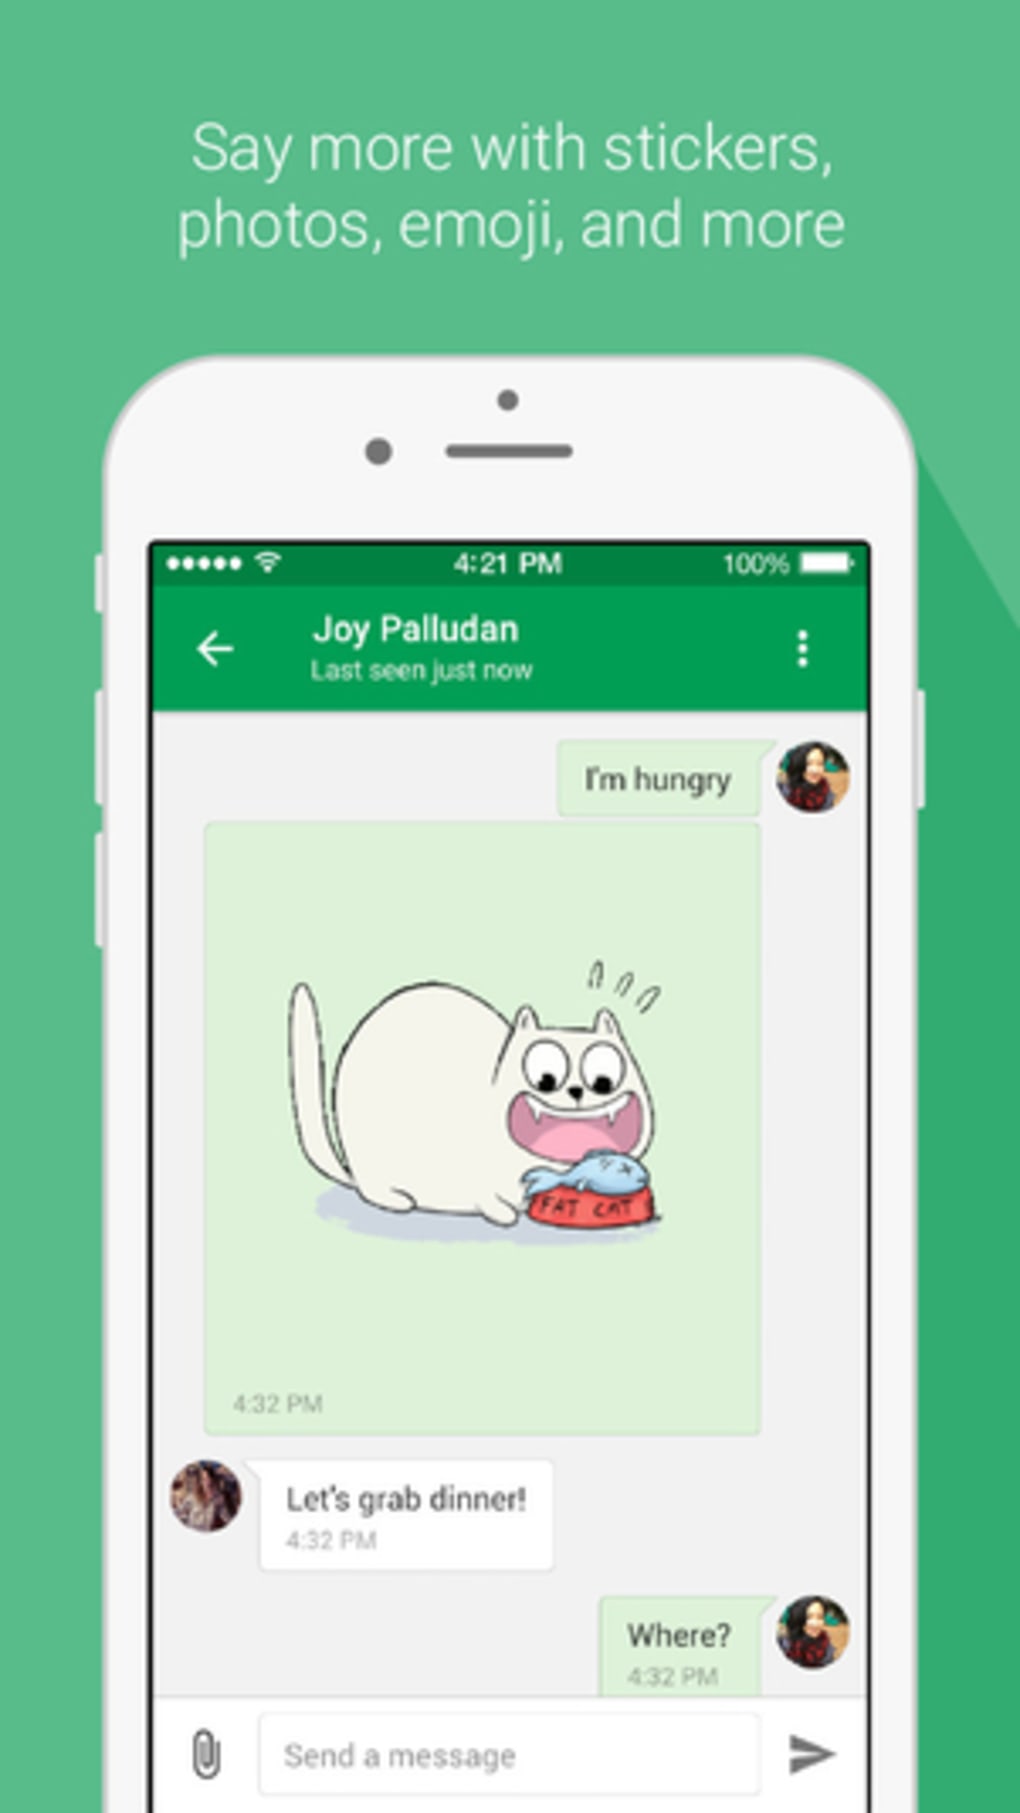 hangouts on air iphone